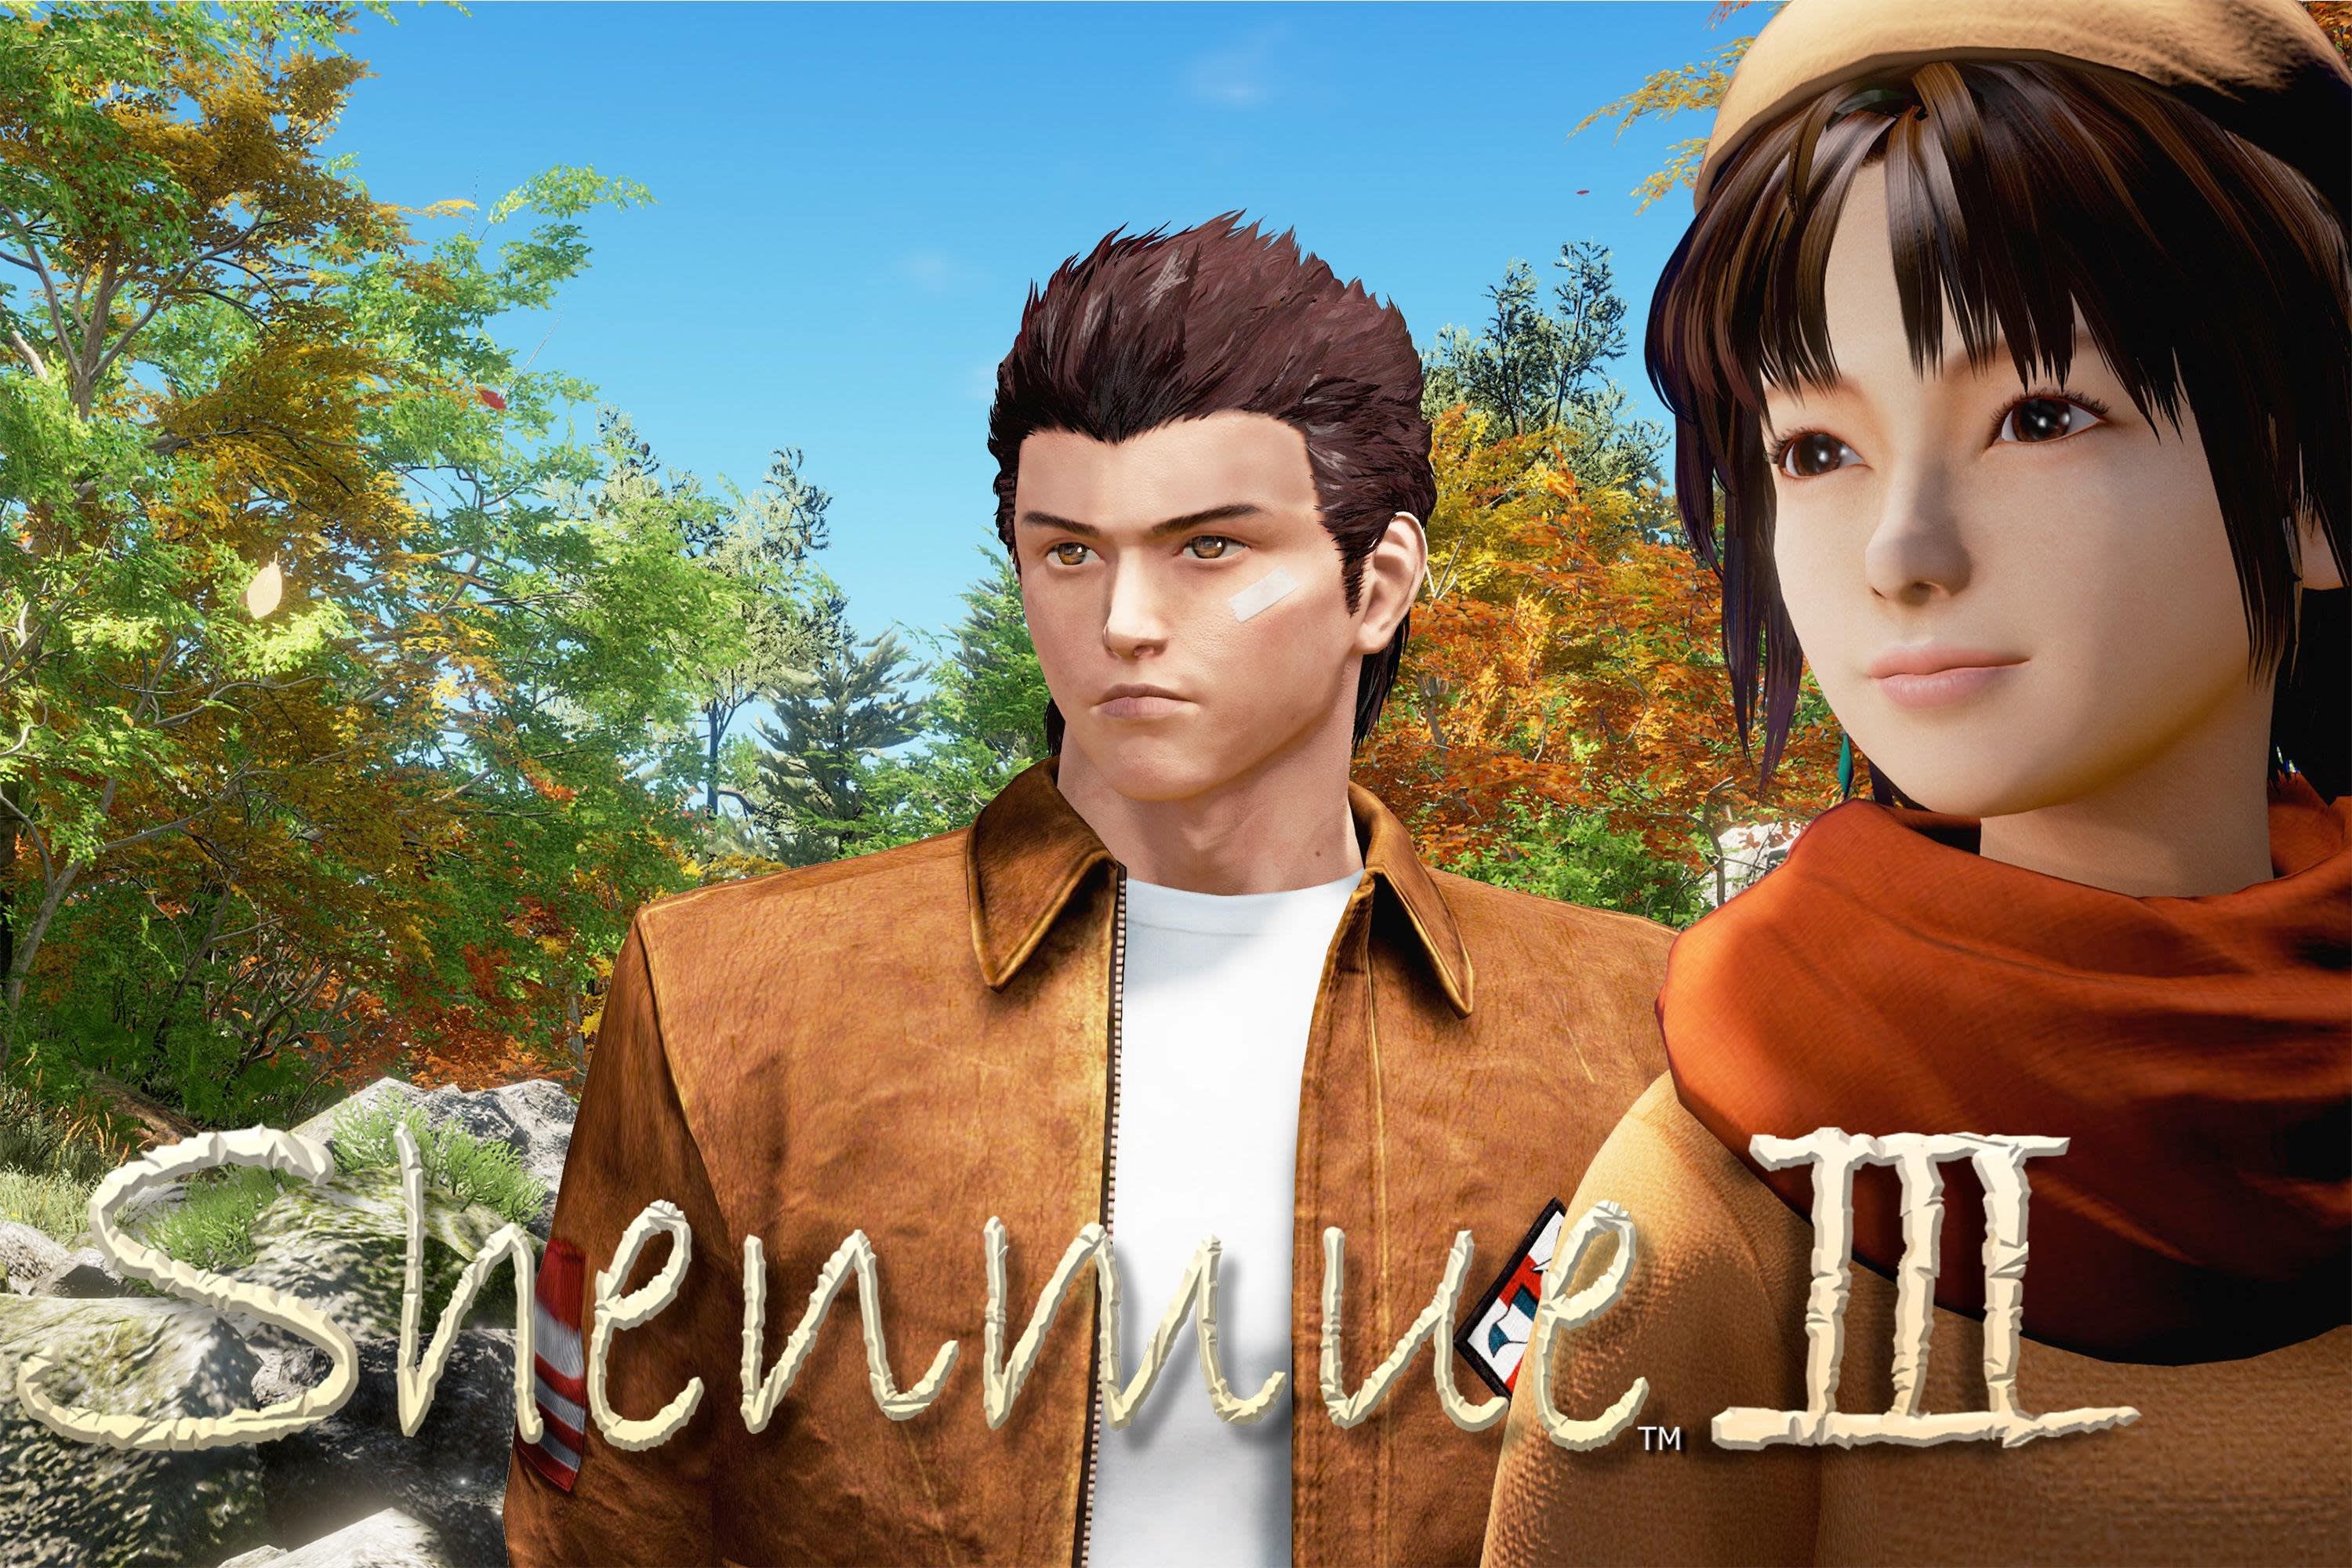 the-ryo-character-from-the-iconic-shenmue-video-game-series